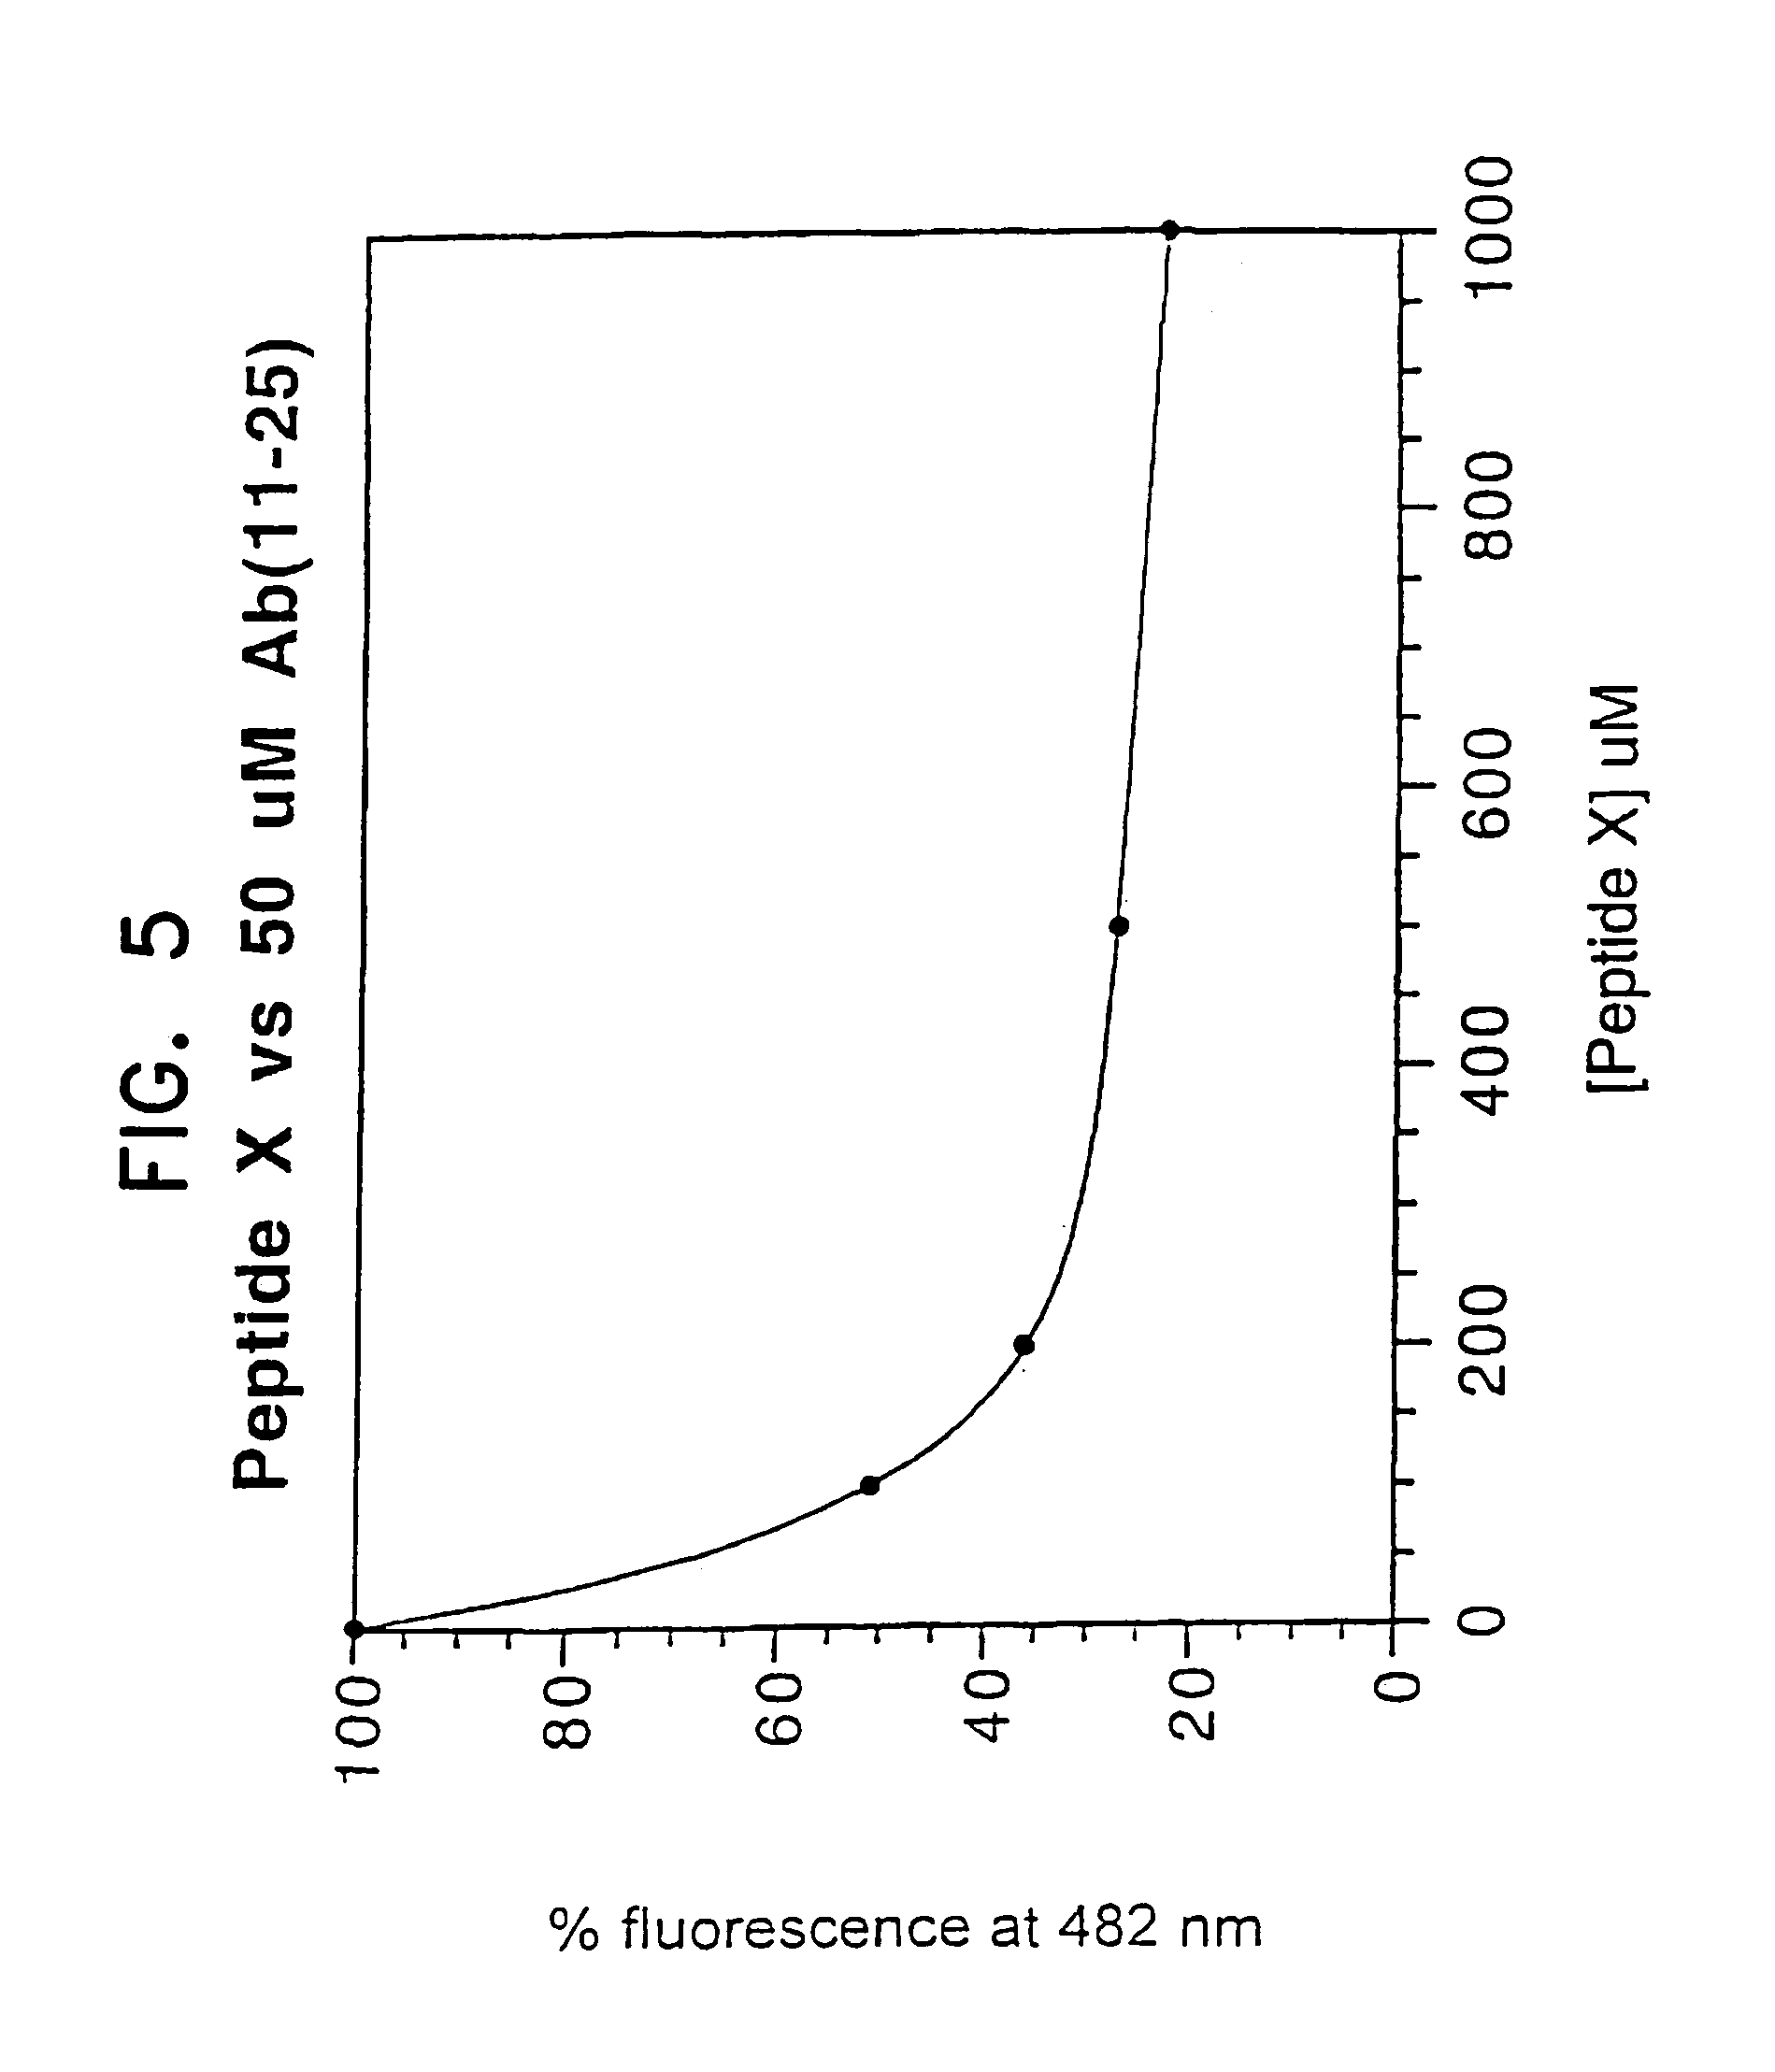 Peptides containing N-substituted D-amino acids for preventing β-strand association